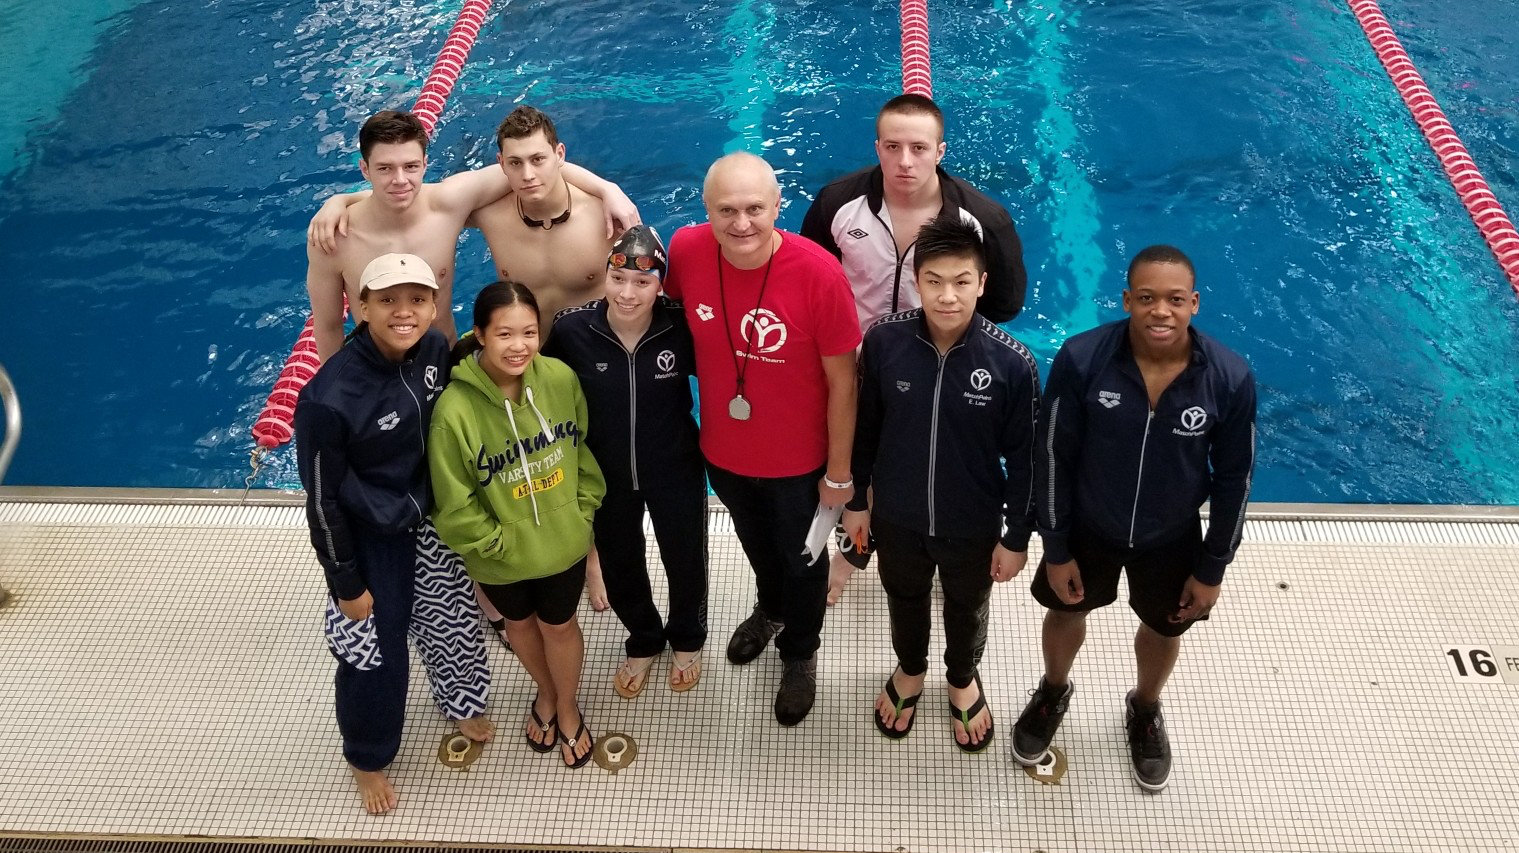 MatchPoint NYC Swim Team at the Junior Olympics